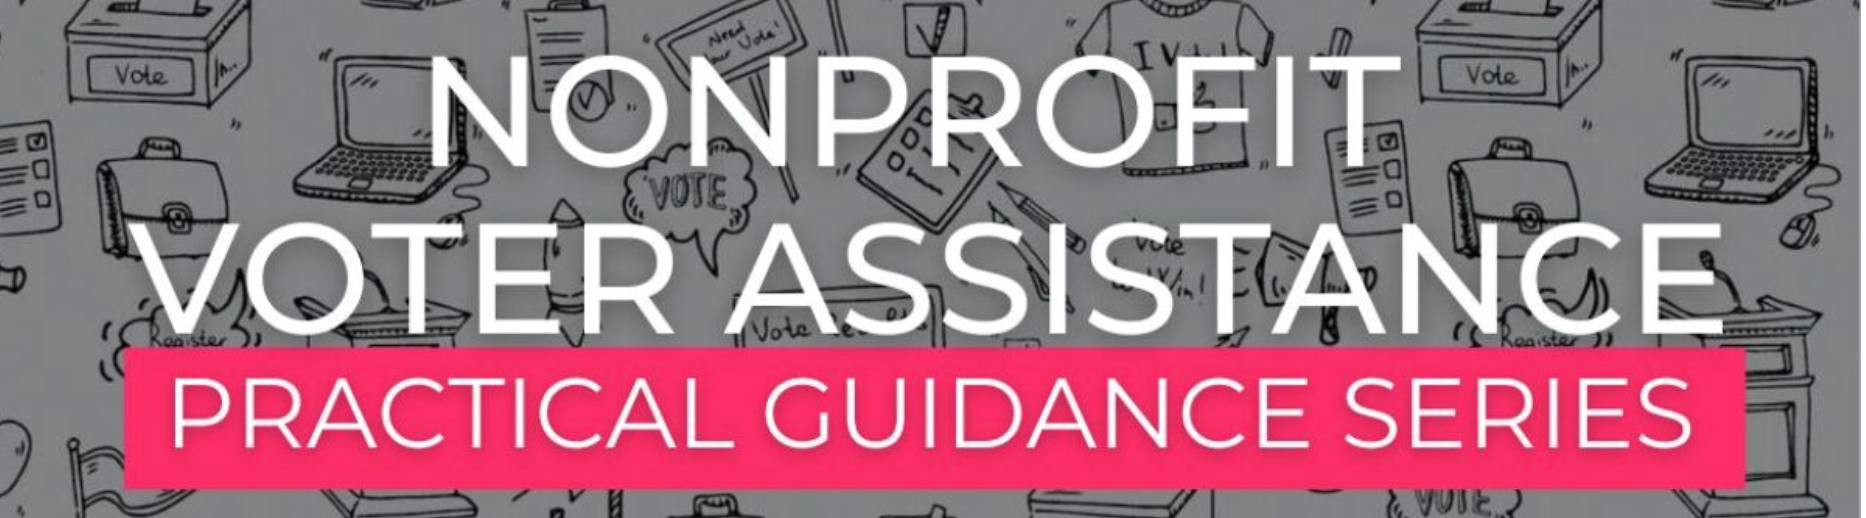 Nonprofit voter assistance practical guidance series. White text with a backdrop of various cartoon images of voting ballots, tshirts, laptops, podiums, picket signs, and more. 